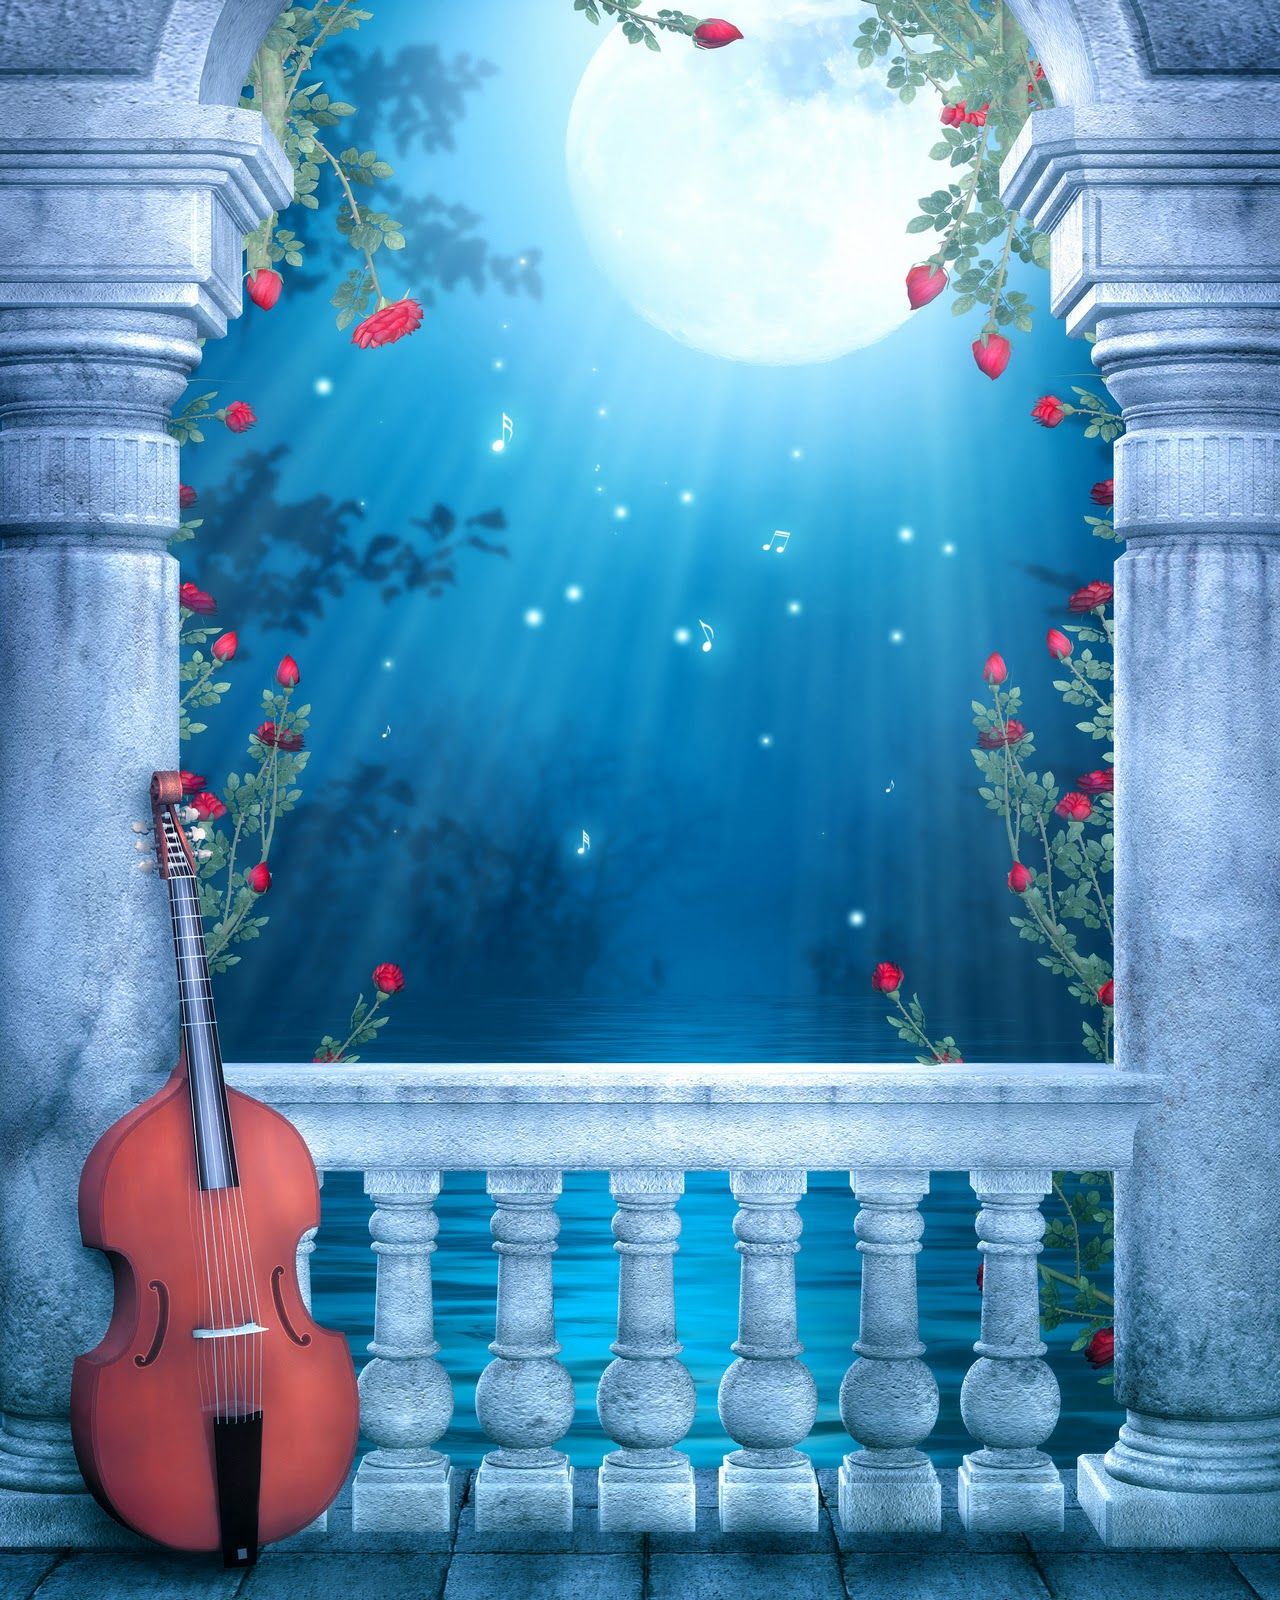 background wallpaper for photoshop,blue,stage,architecture,violin family